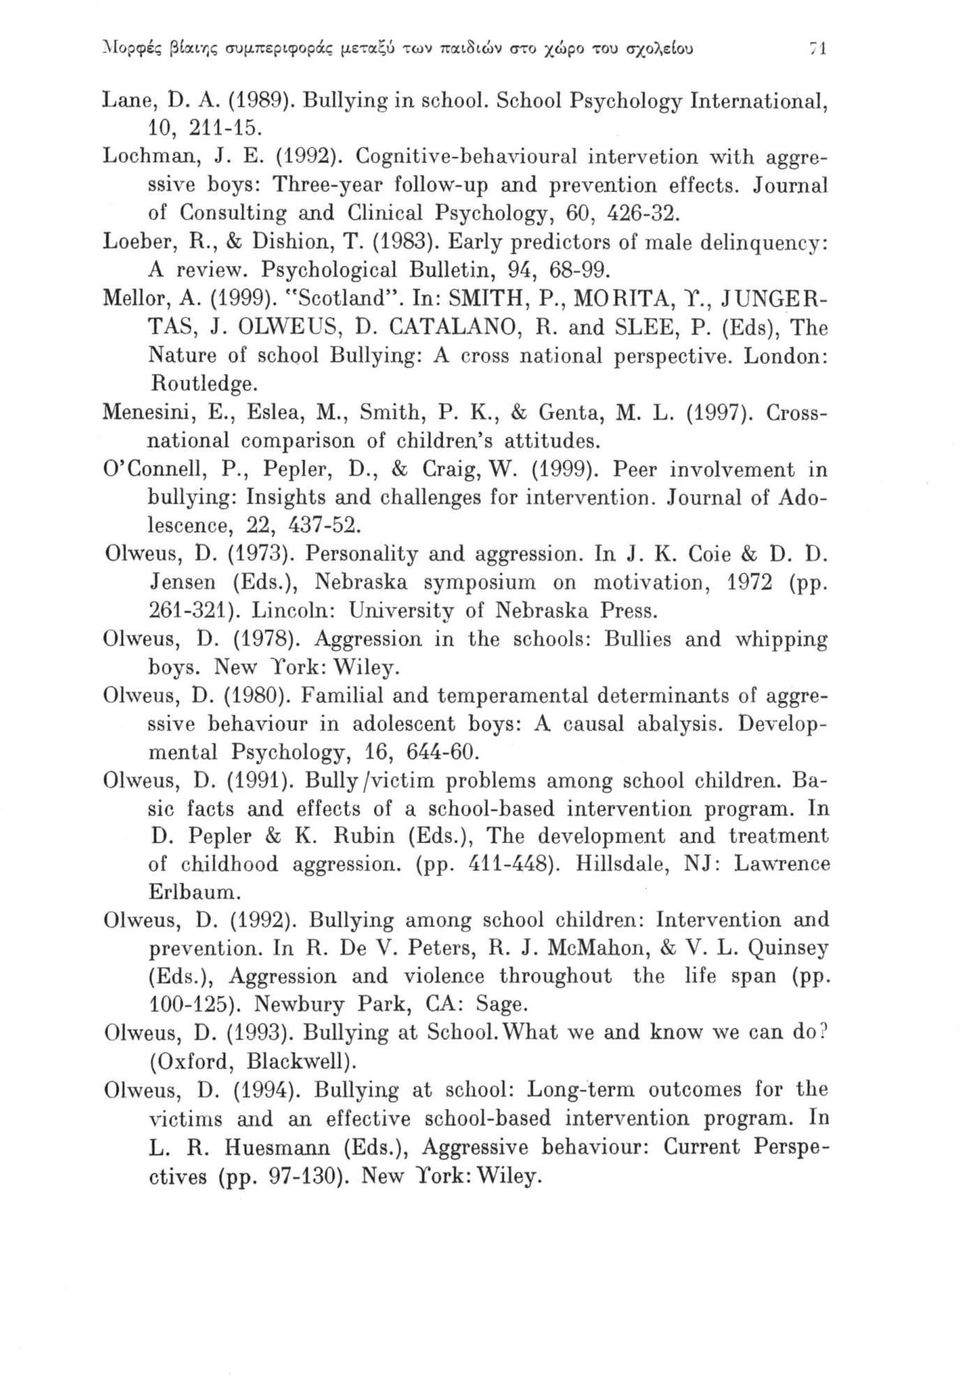 Early predictors of male delinquency: A review. Psychological Bulletin, 94, 68-99. Mellor, A. (1999). "Scotland. In: SMITH, P., MO RITA, Y., JUNGER- TAS, J. OLWEUS, D. CATALANO, R. and SLEE, P.